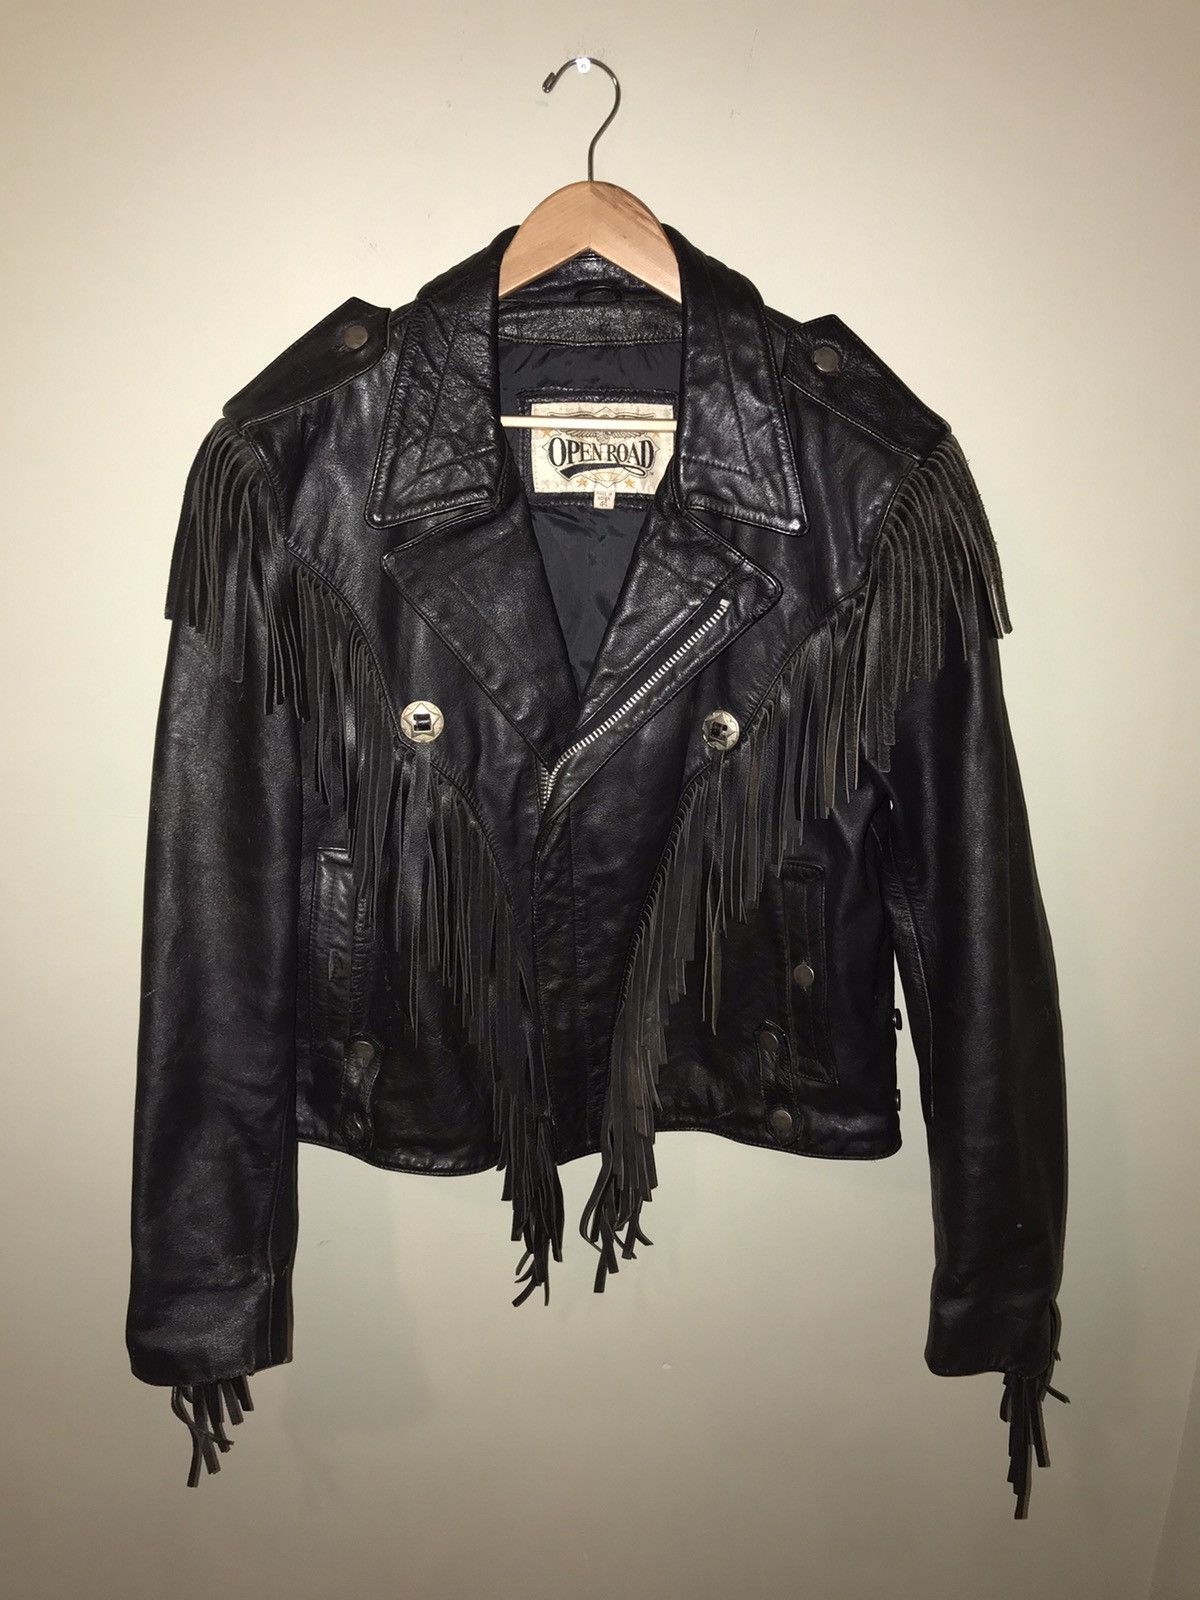 Vintage Vintage 80’s Open Rode Leather Riding Motorcycle Jacket | Grailed